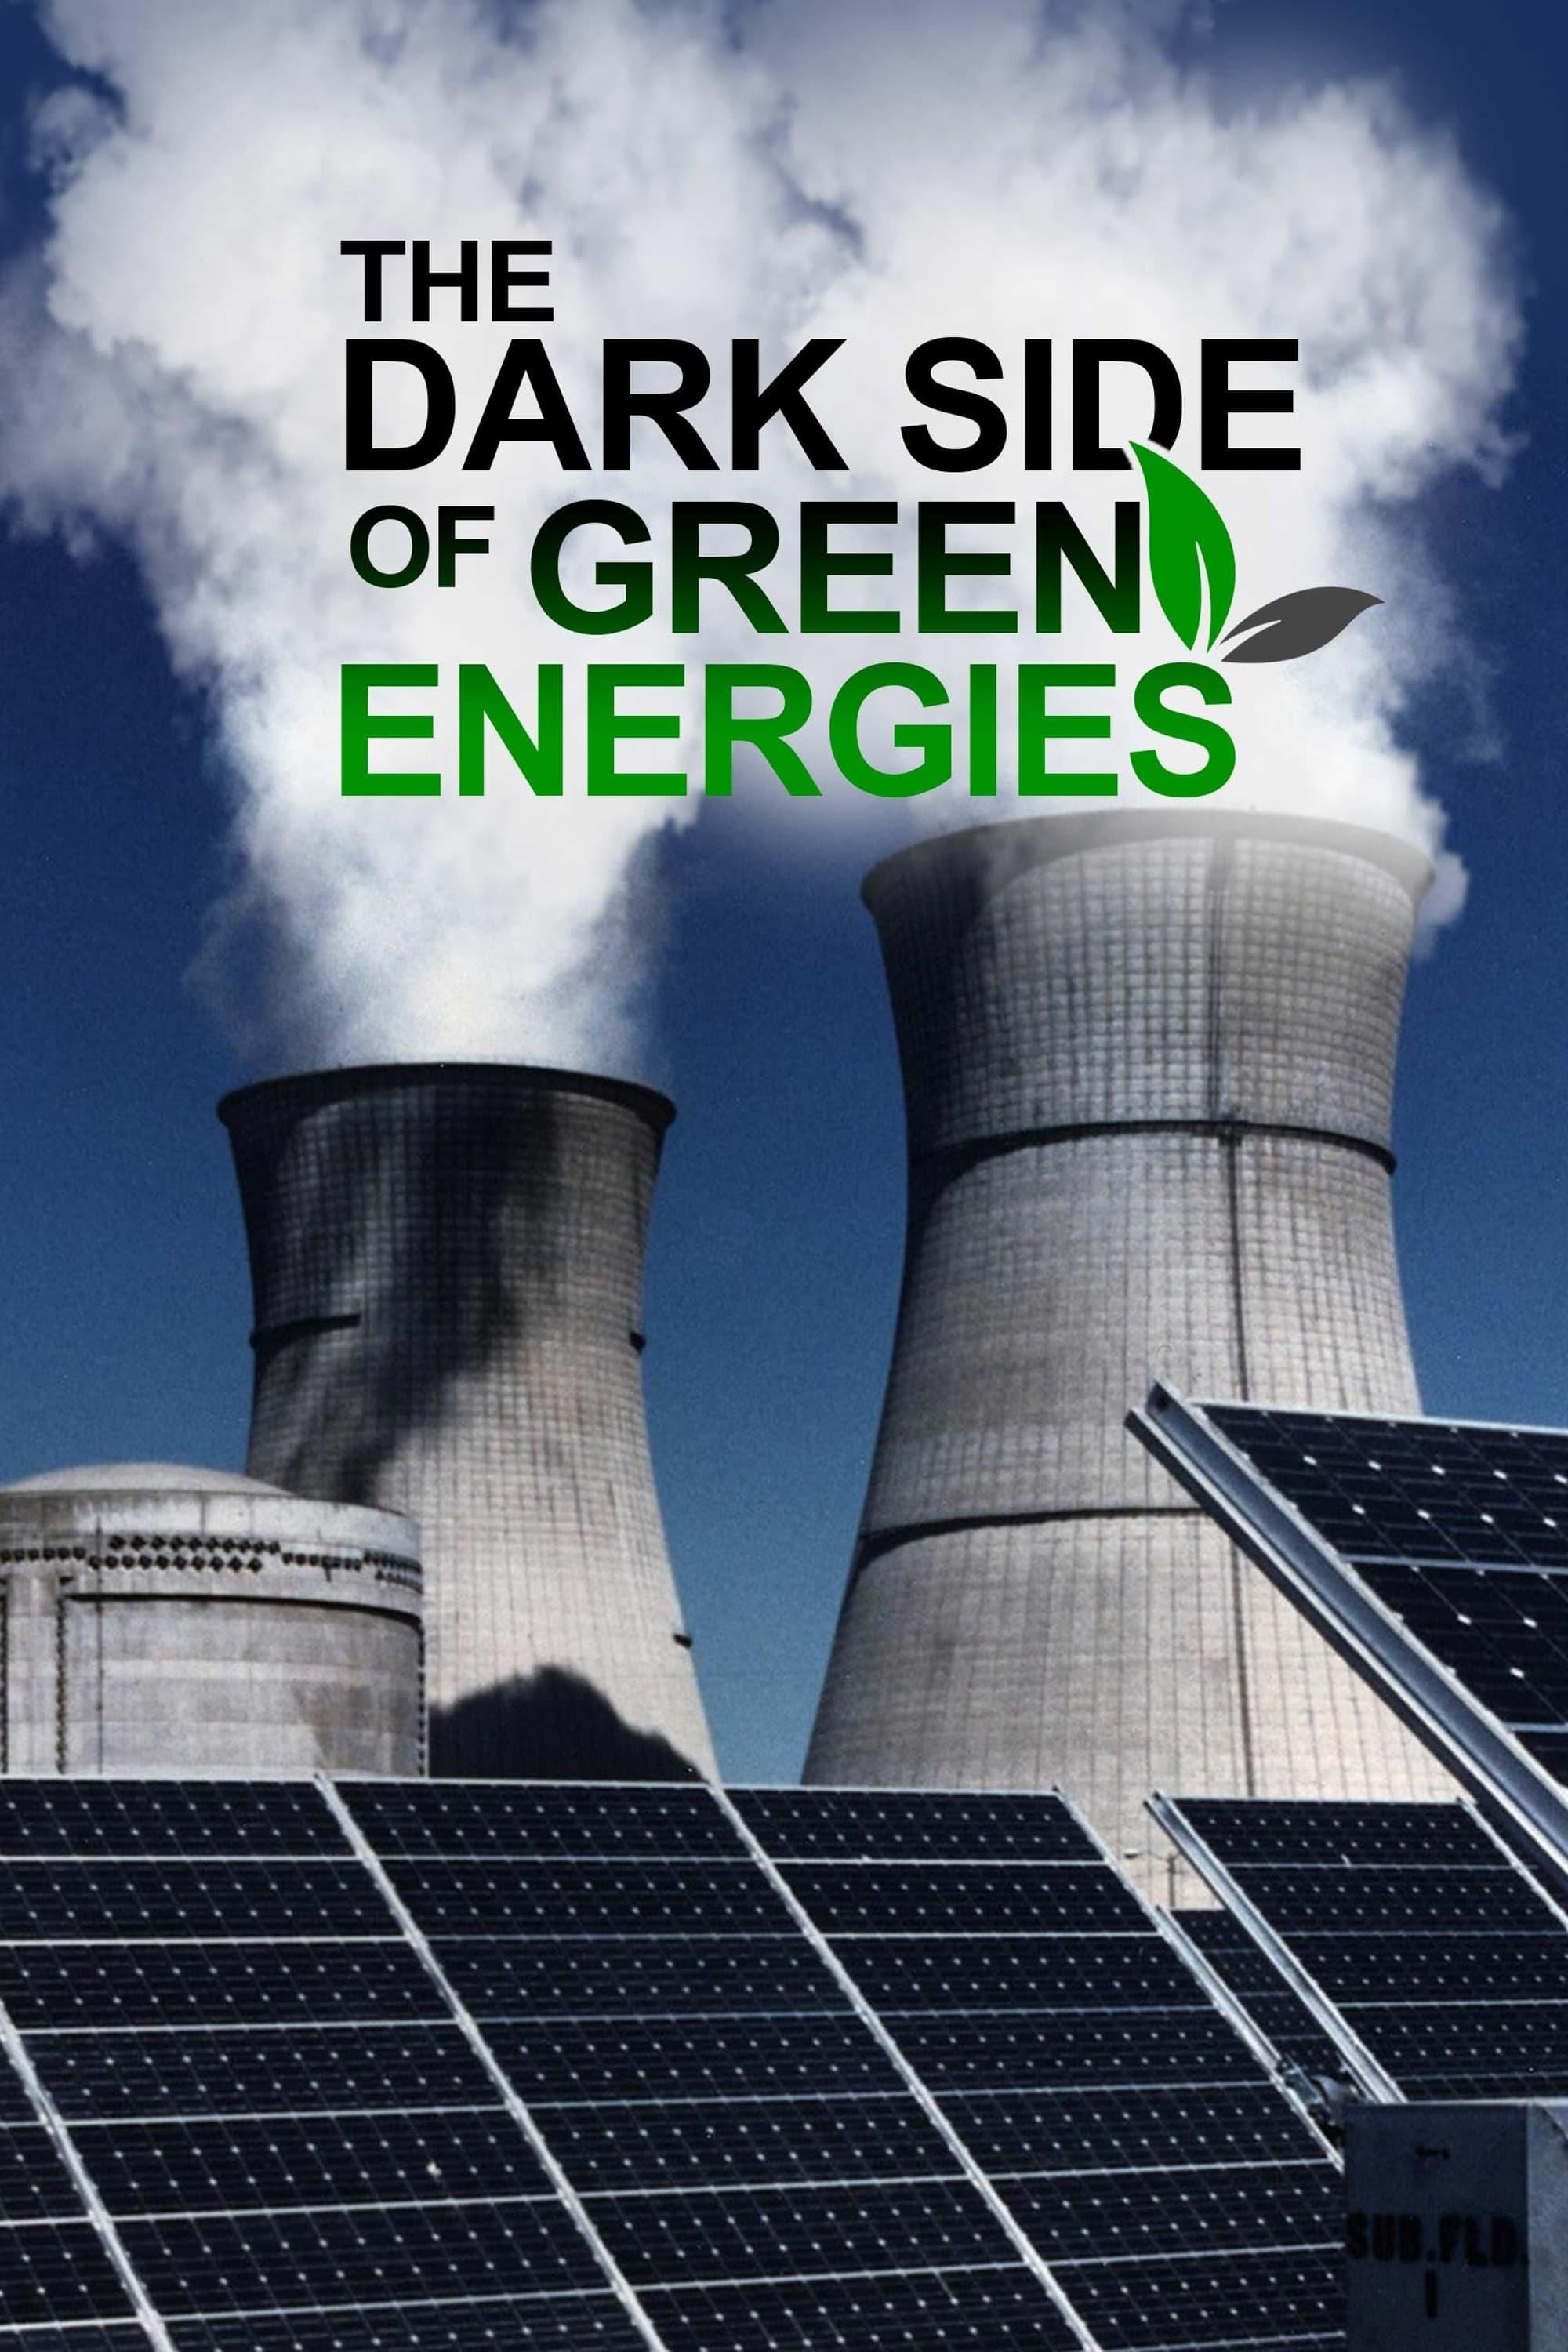 The Dark Side of Green Energies poster